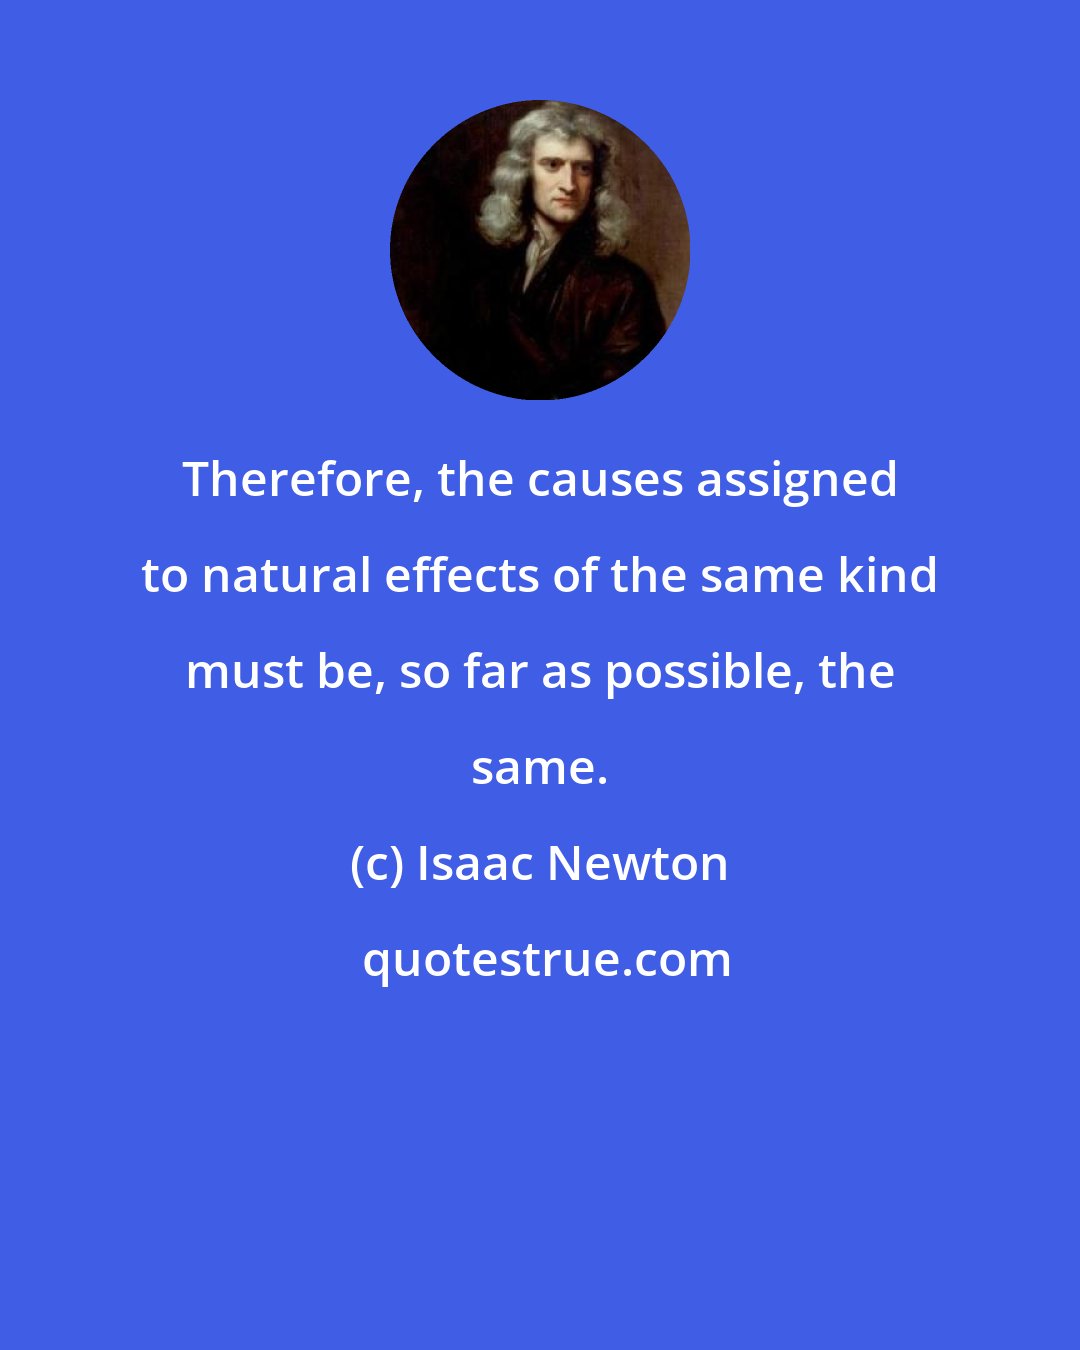 Isaac Newton: Therefore, the causes assigned to natural effects of the same kind must be, so far as possible, the same.